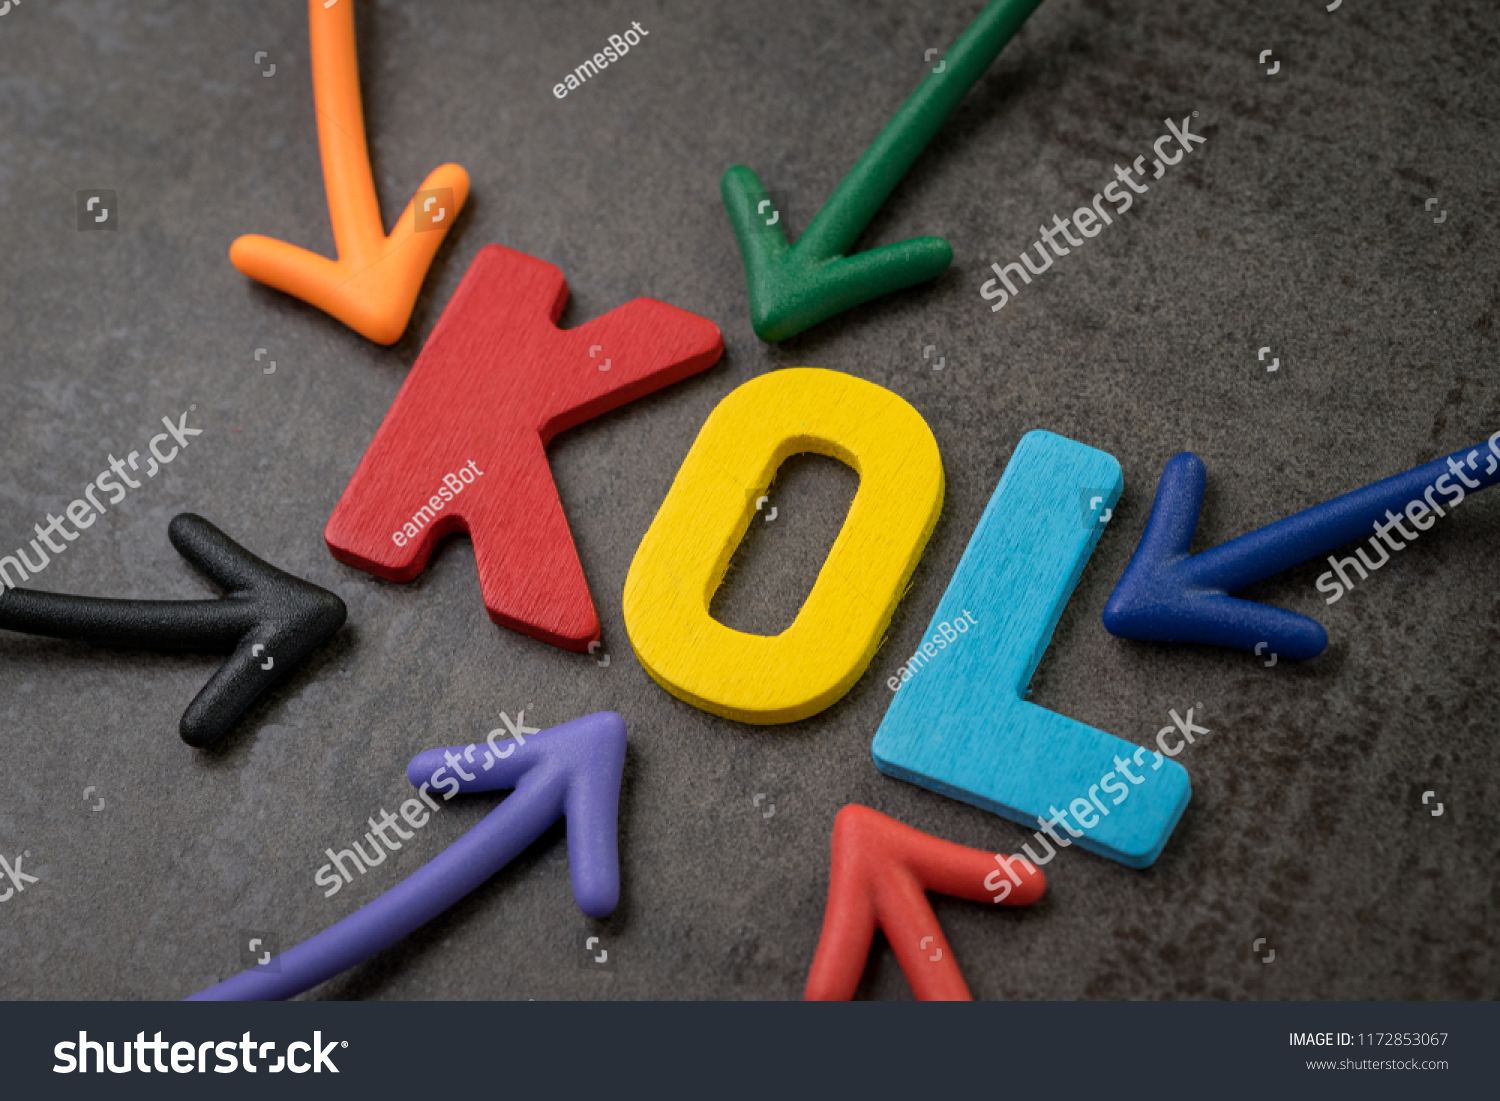 KOL abbreviation of Key Opinion Leader, influencer concept, colorful arrows pointing to the word KOL at the center of black cement wall, new social media marketing in digital world. #1172853067